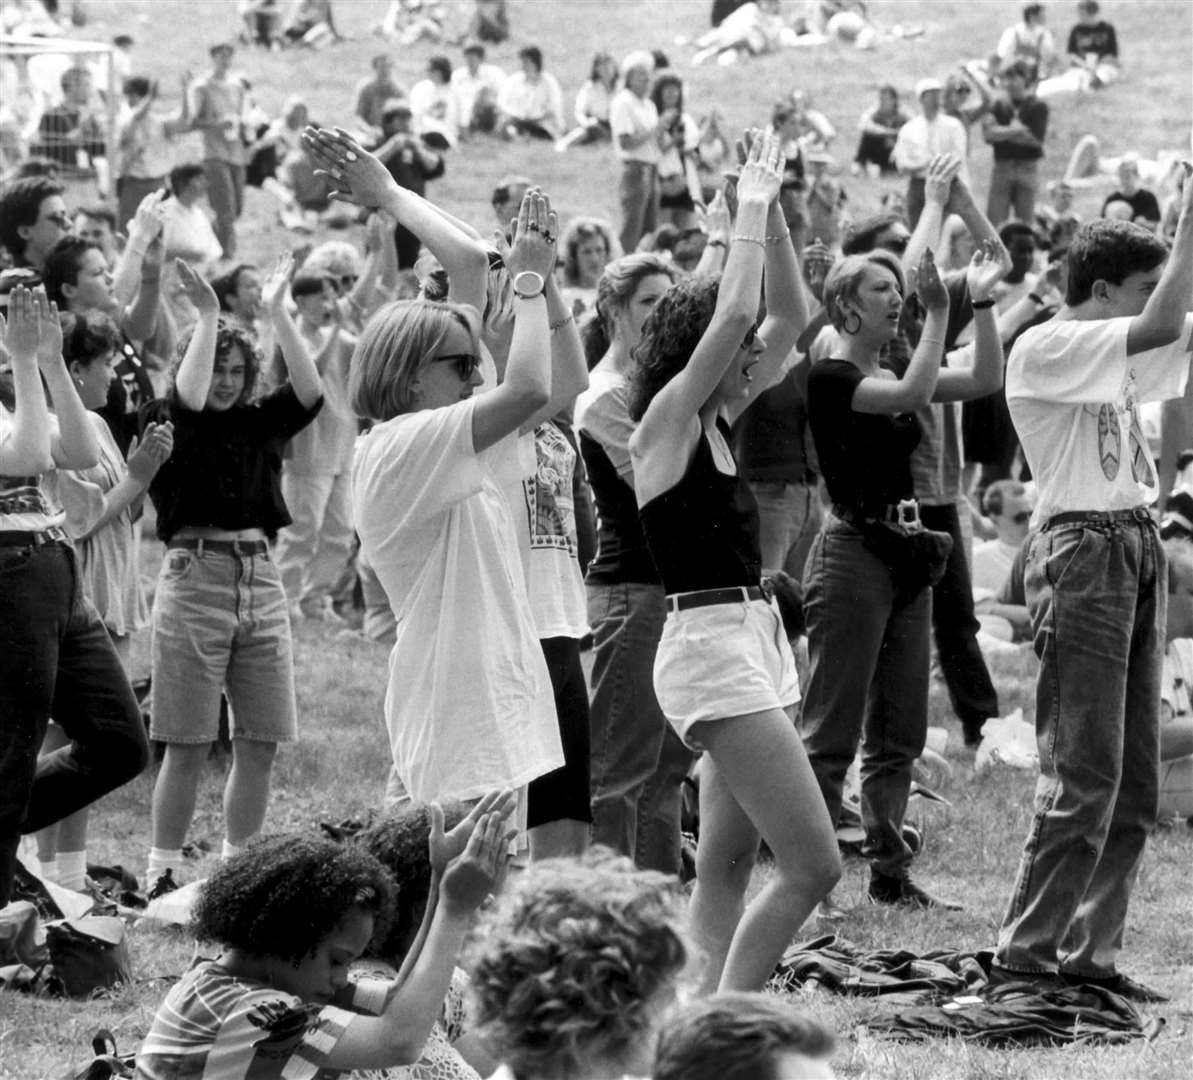 Revellers at an open-air rock concert held at Broome Park, Canterbury, in May 1991. Danni Minogue, Gerry Marsden (from Gerry and the Pacemakers) and Sinitta were among those performing